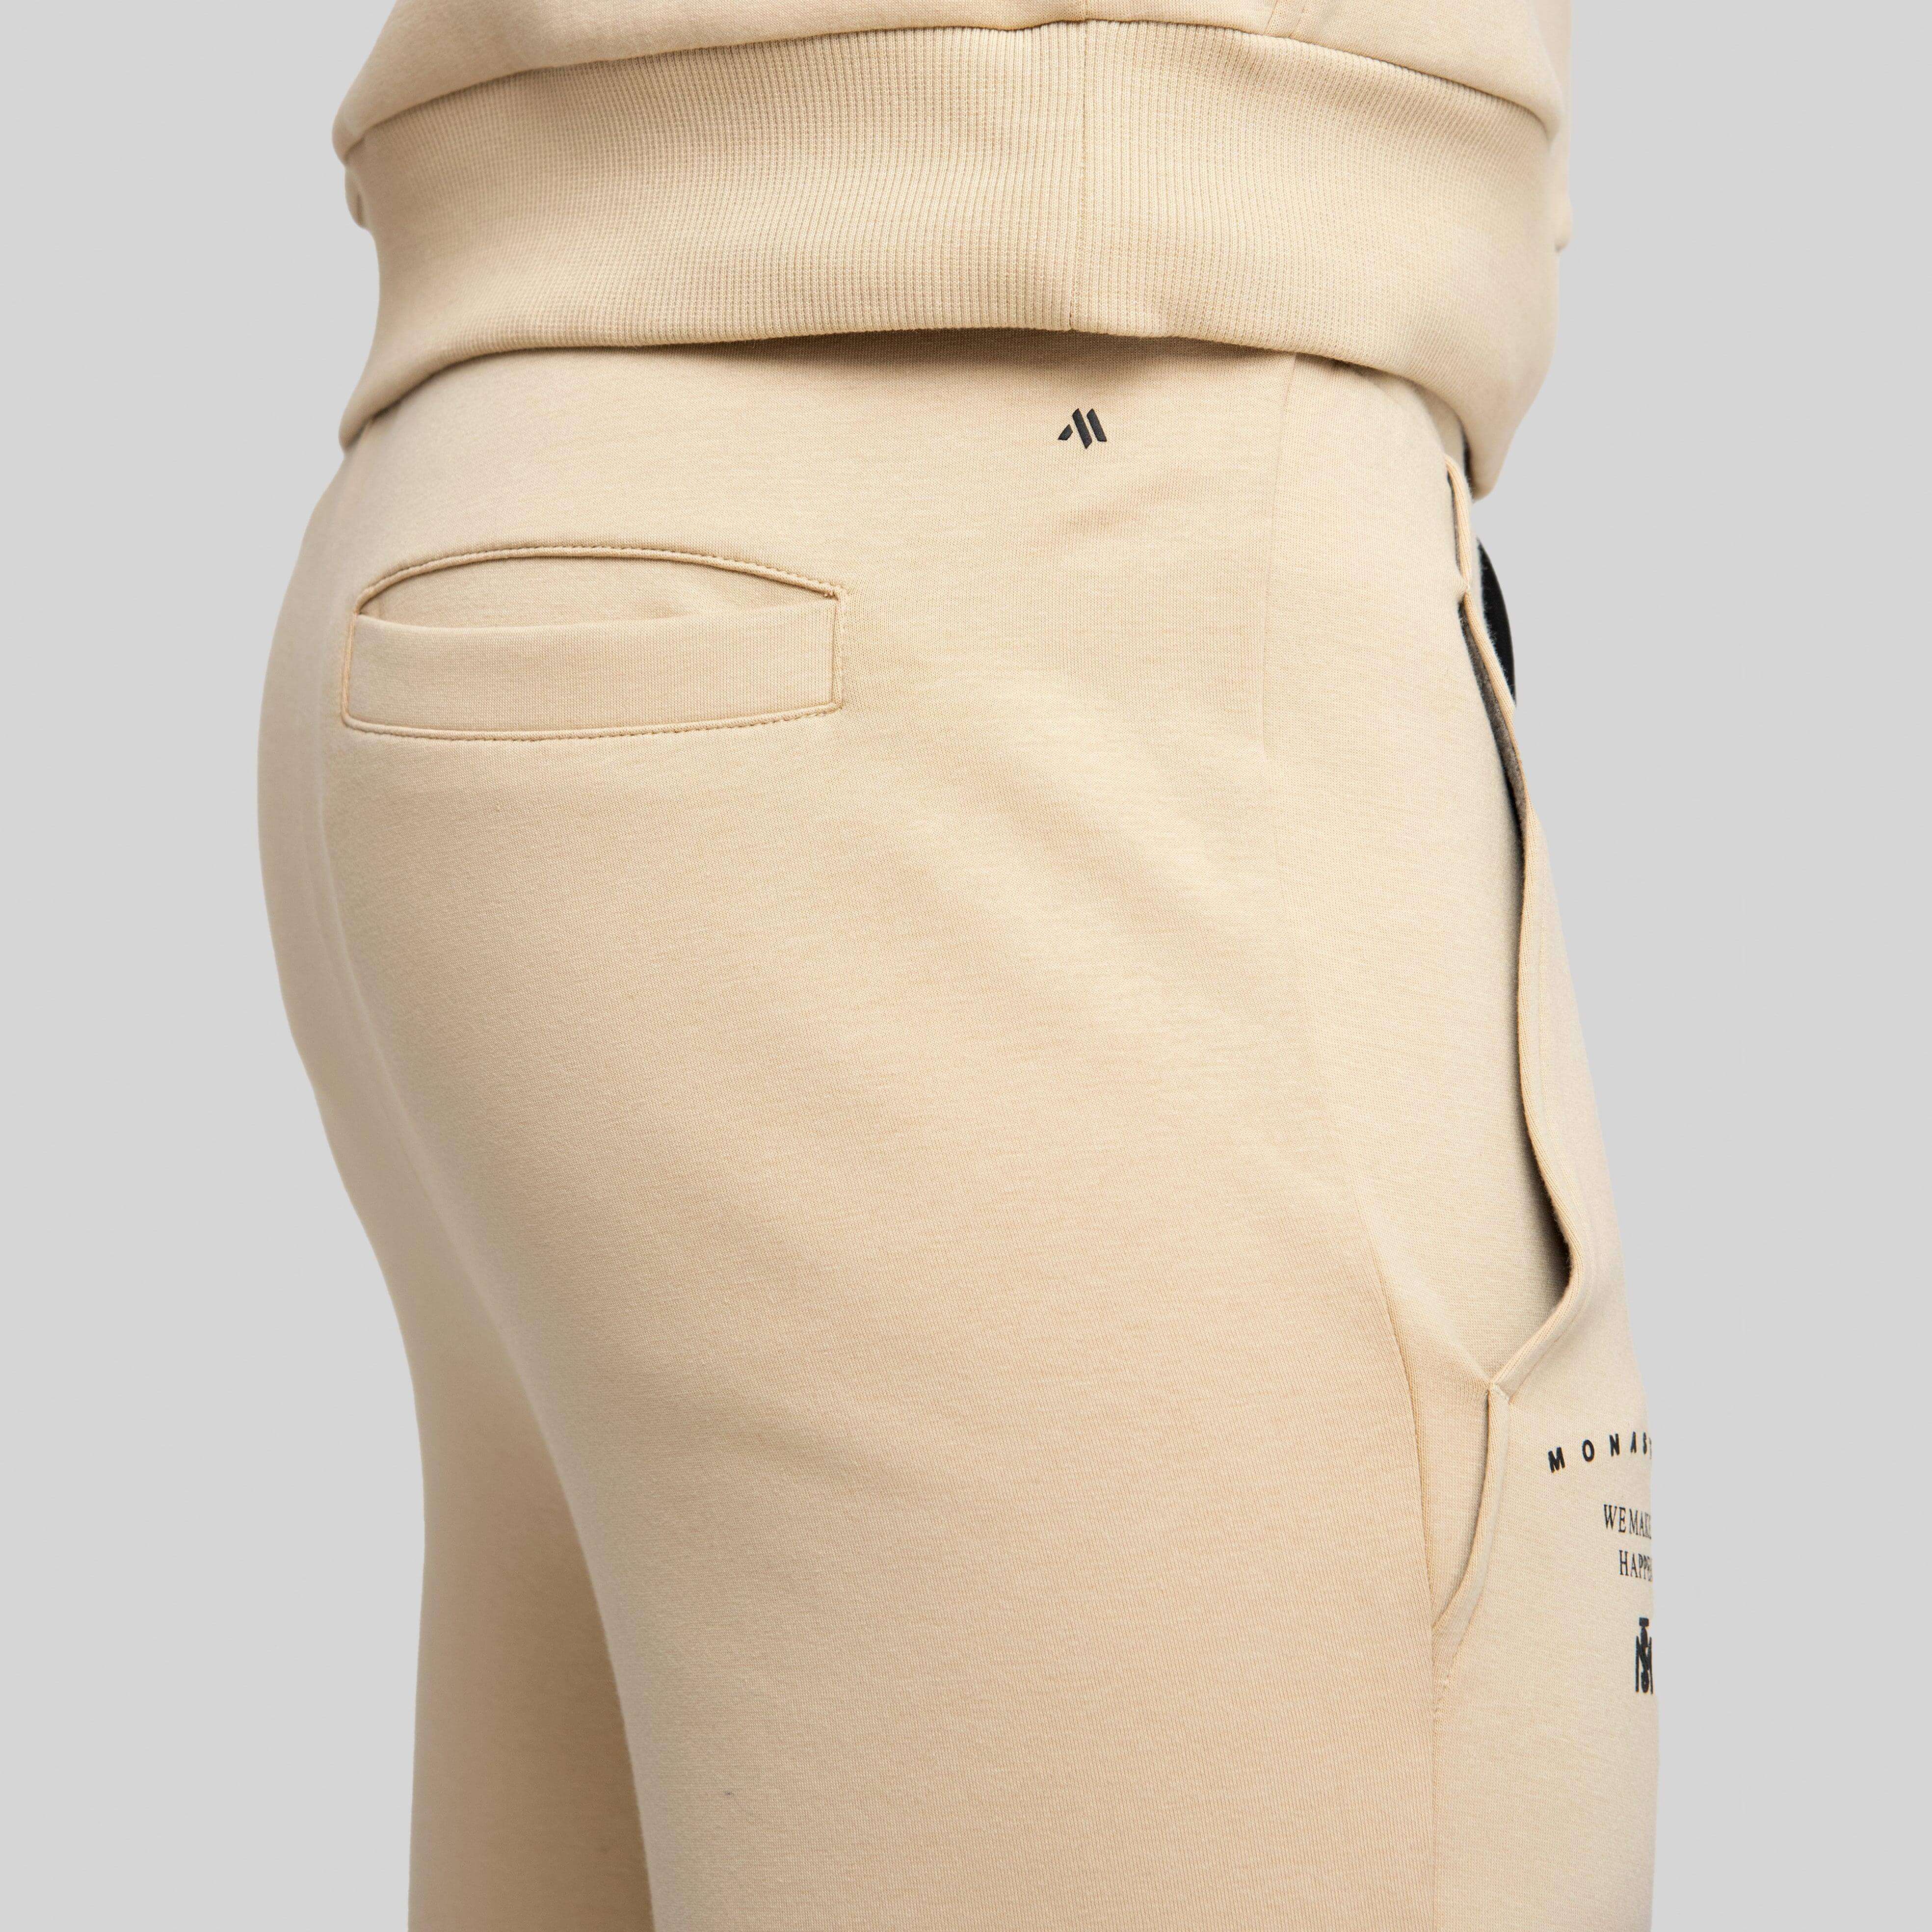 AUSTRALIS CAMEL SPORT TROUSERS | Monastery Couture